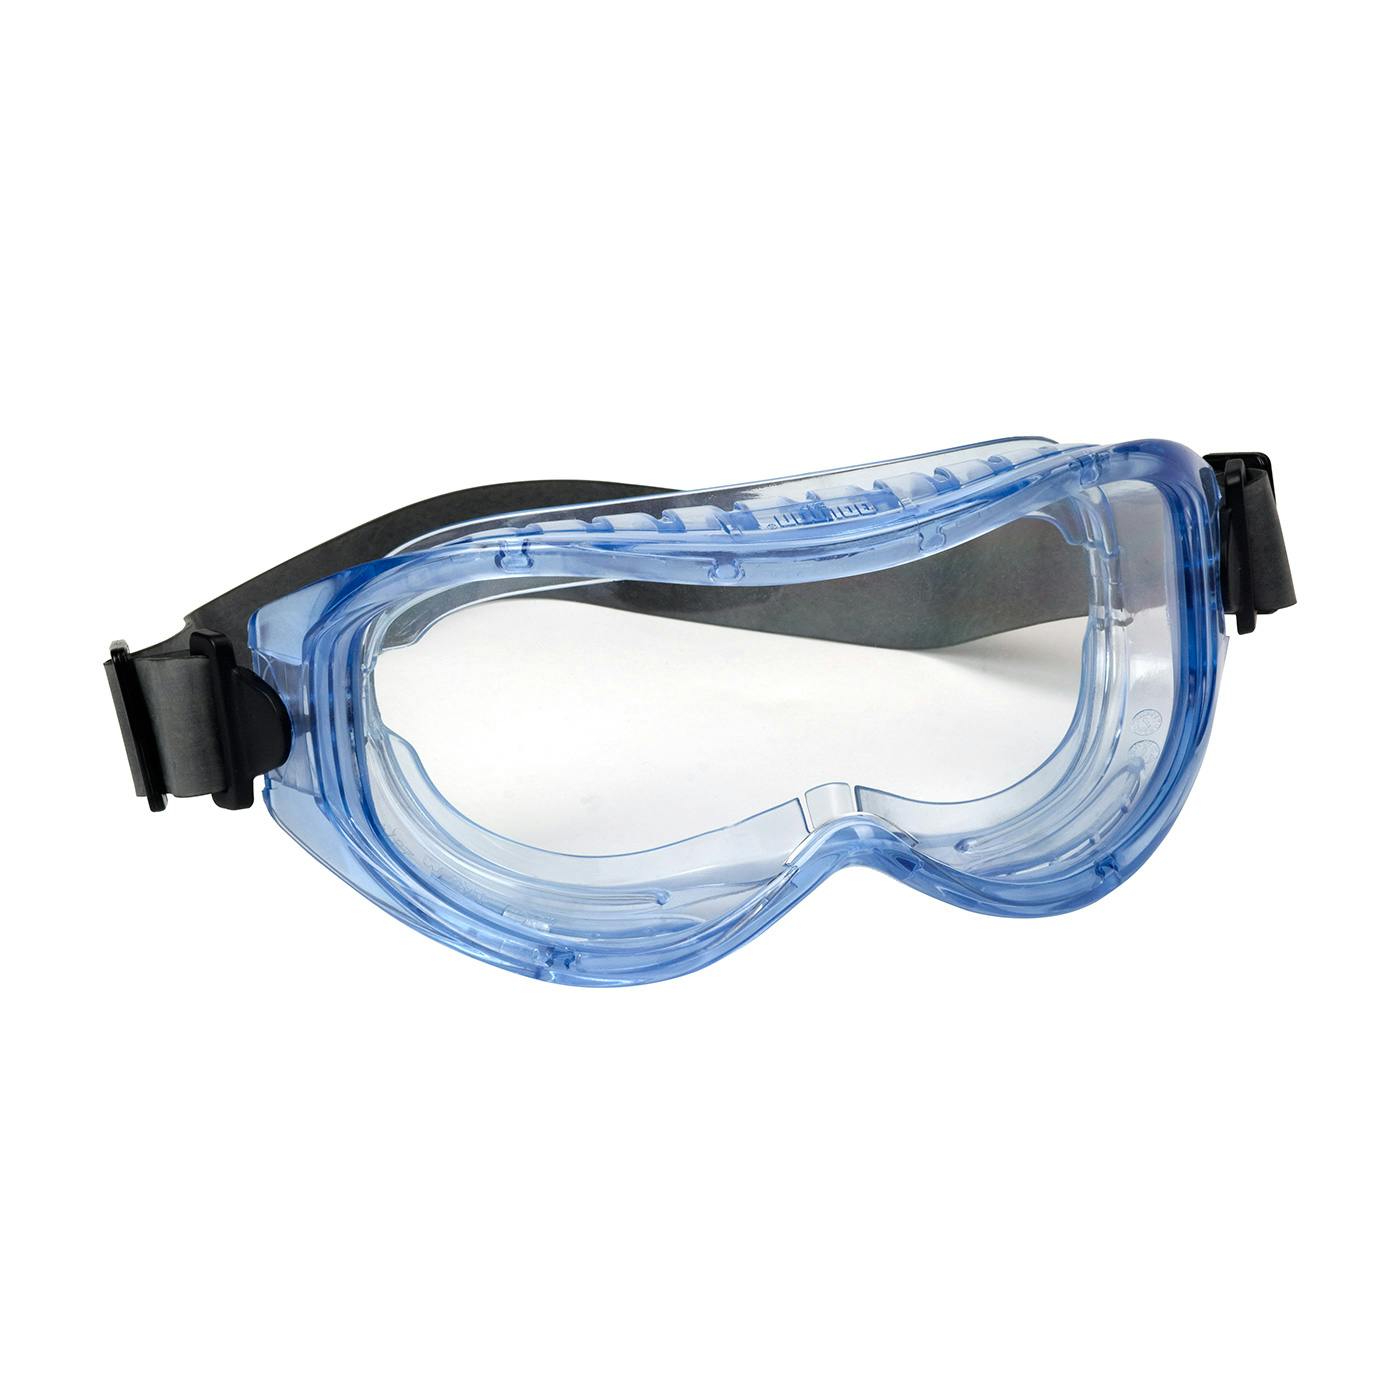 Indirect Vent Goggle with Light Blue Body, Clear Lens and Anti-Scratch / Anti-Fog Coating - Neoprene Strap, Light Blue (251-5300-400-RHB) - OS